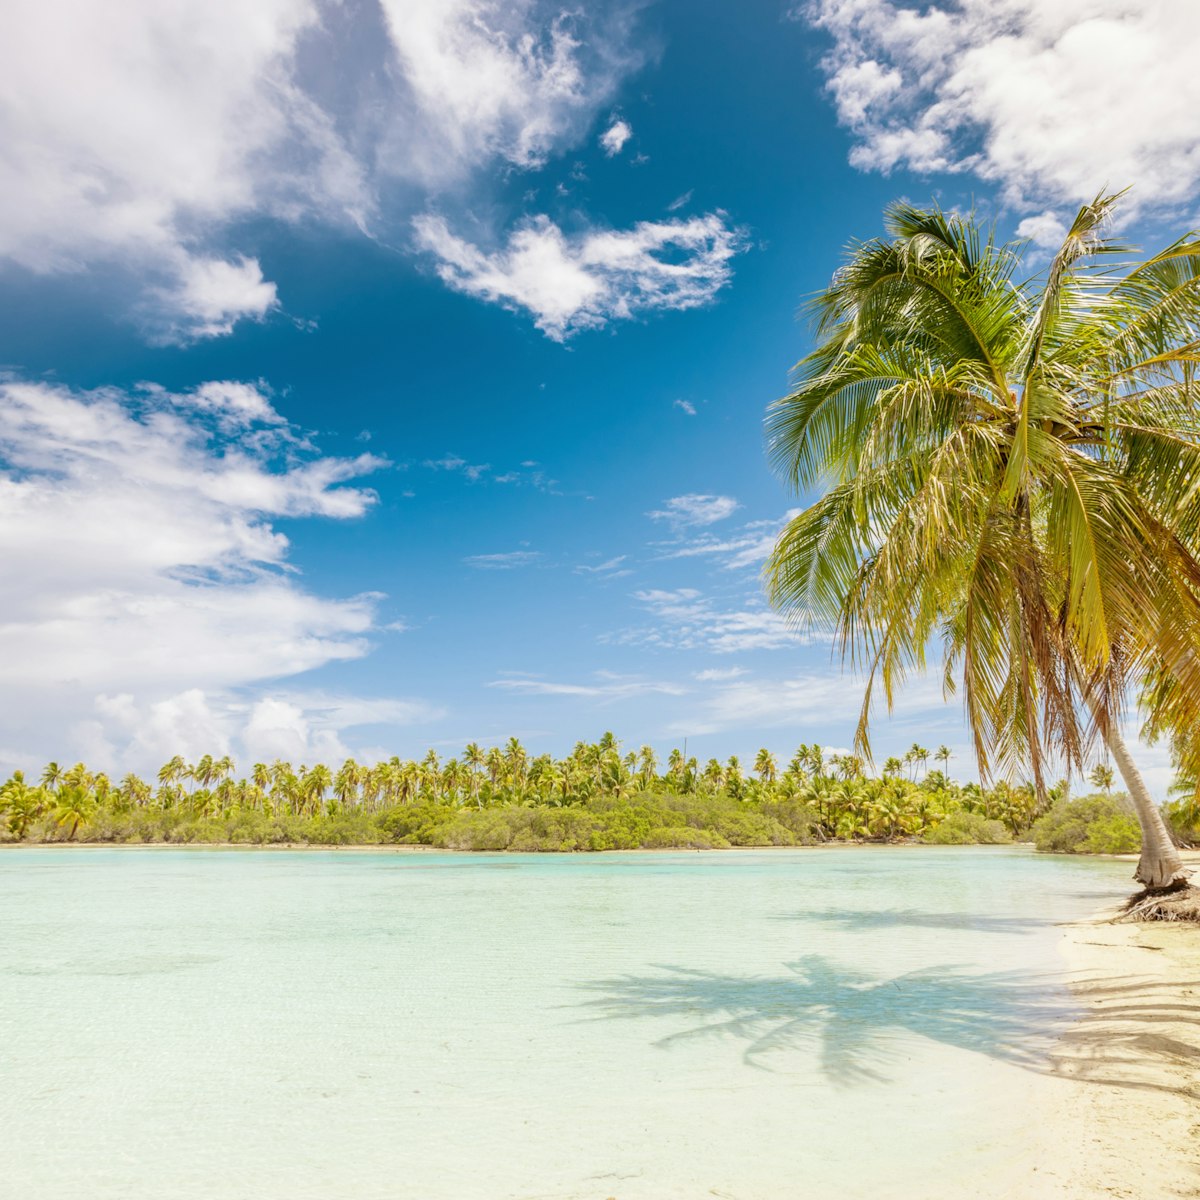 Sand beach with palm trees, turquoise clear water under blue sky. Perfect beach for relaxing. Fakarava Island, Tuamotu Archipelago, French Polynesia.